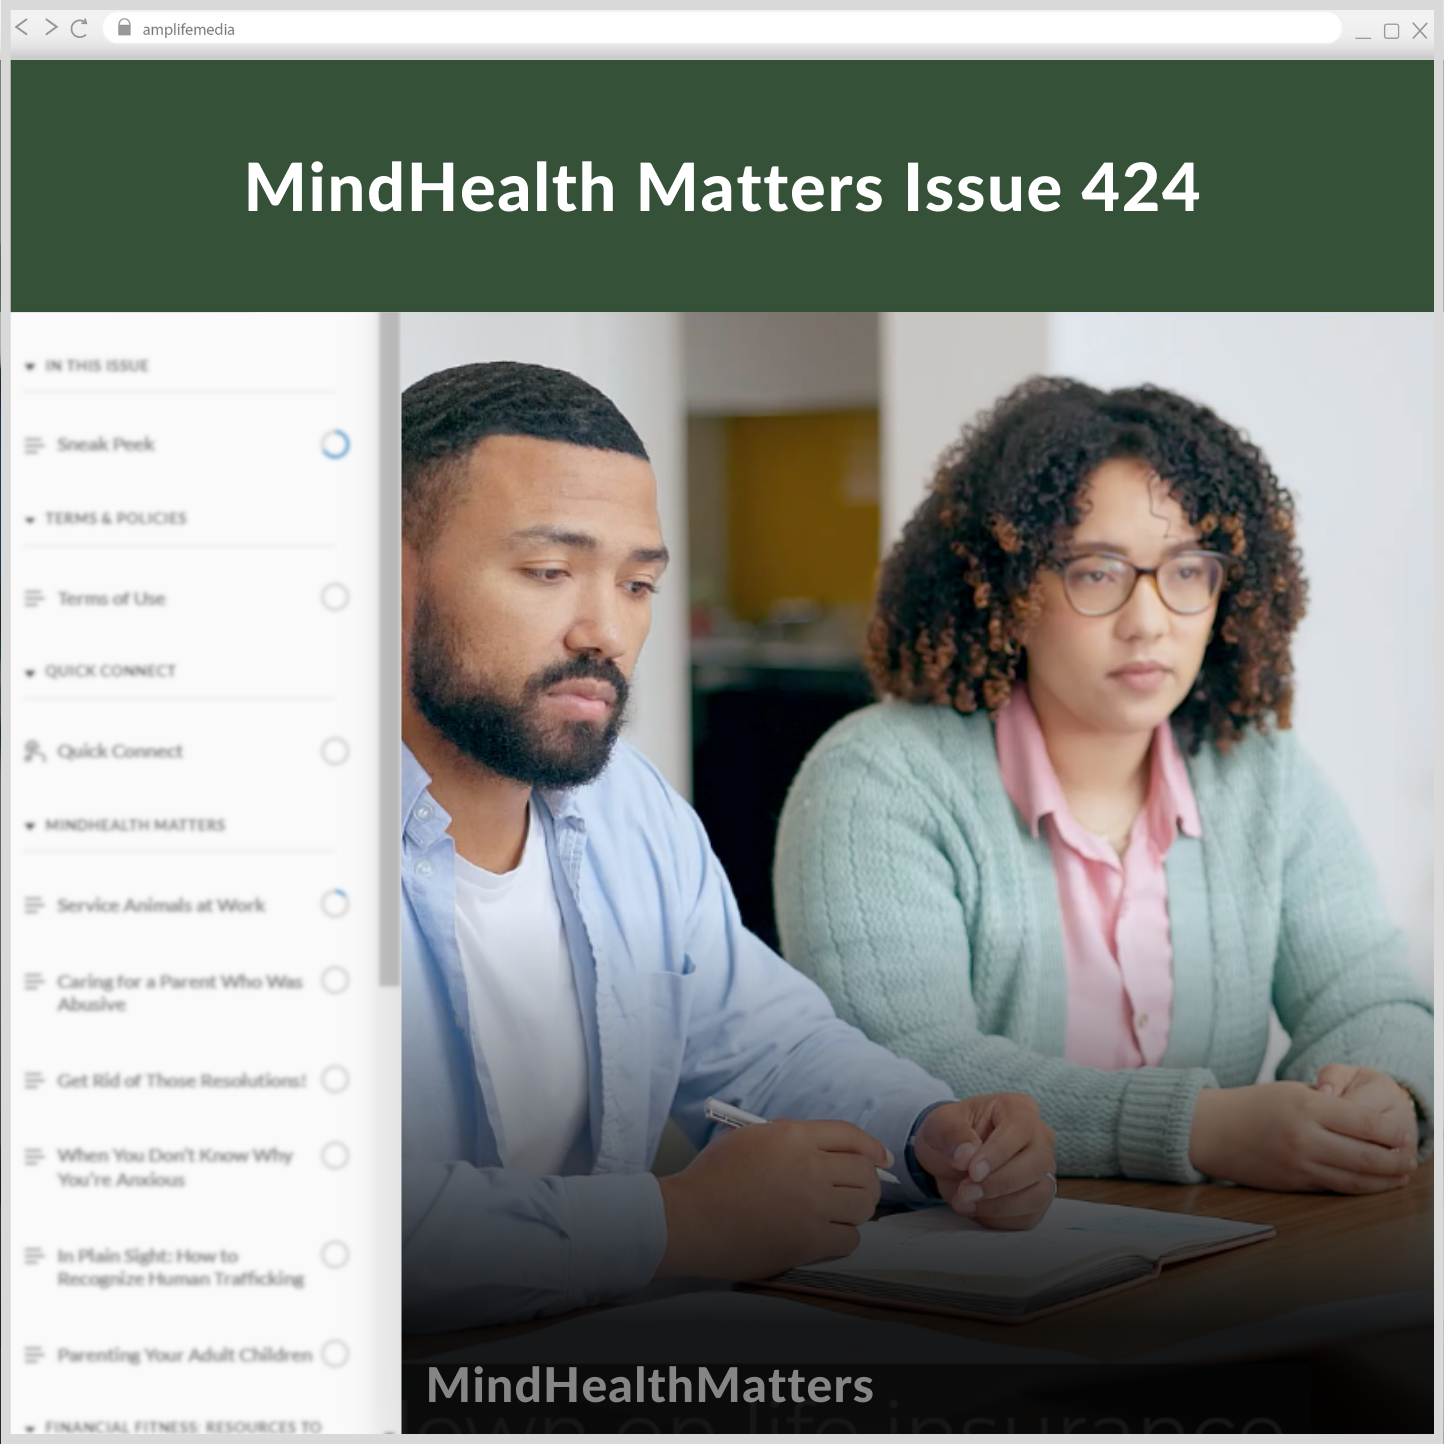 Subscription to Wellbeing Media: MindHealth Matters 424